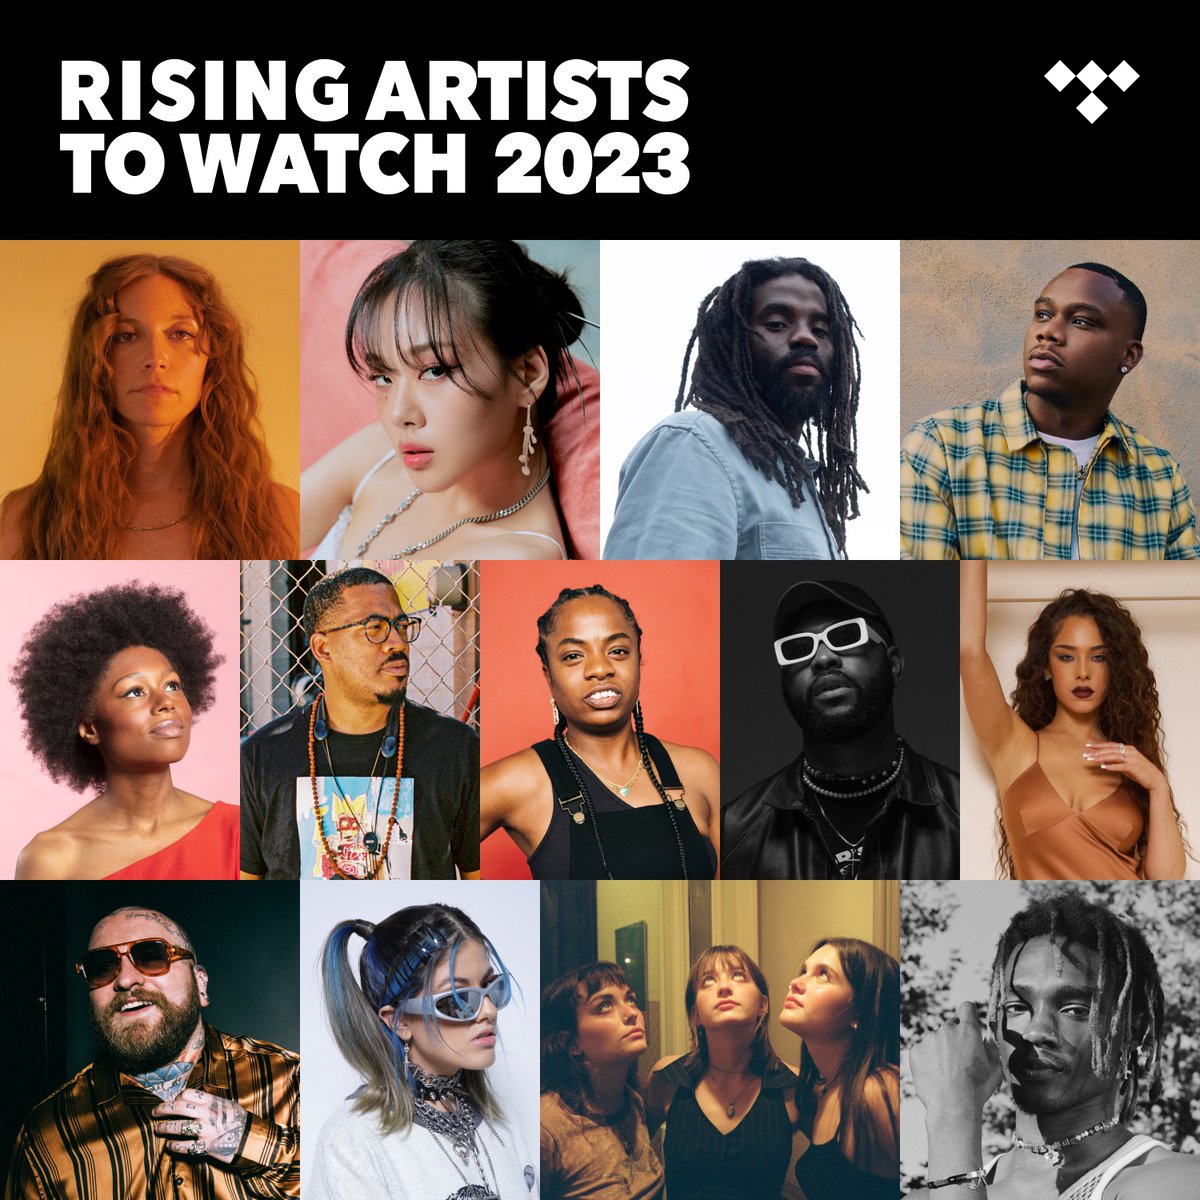 Thrilled to be chosen as one of the top 13 Rising Artists to Watch this year by @TIDAL - thank you 🎶🖤 @deccaclassics. Check out the article here: tidal.com/magazine/artic…